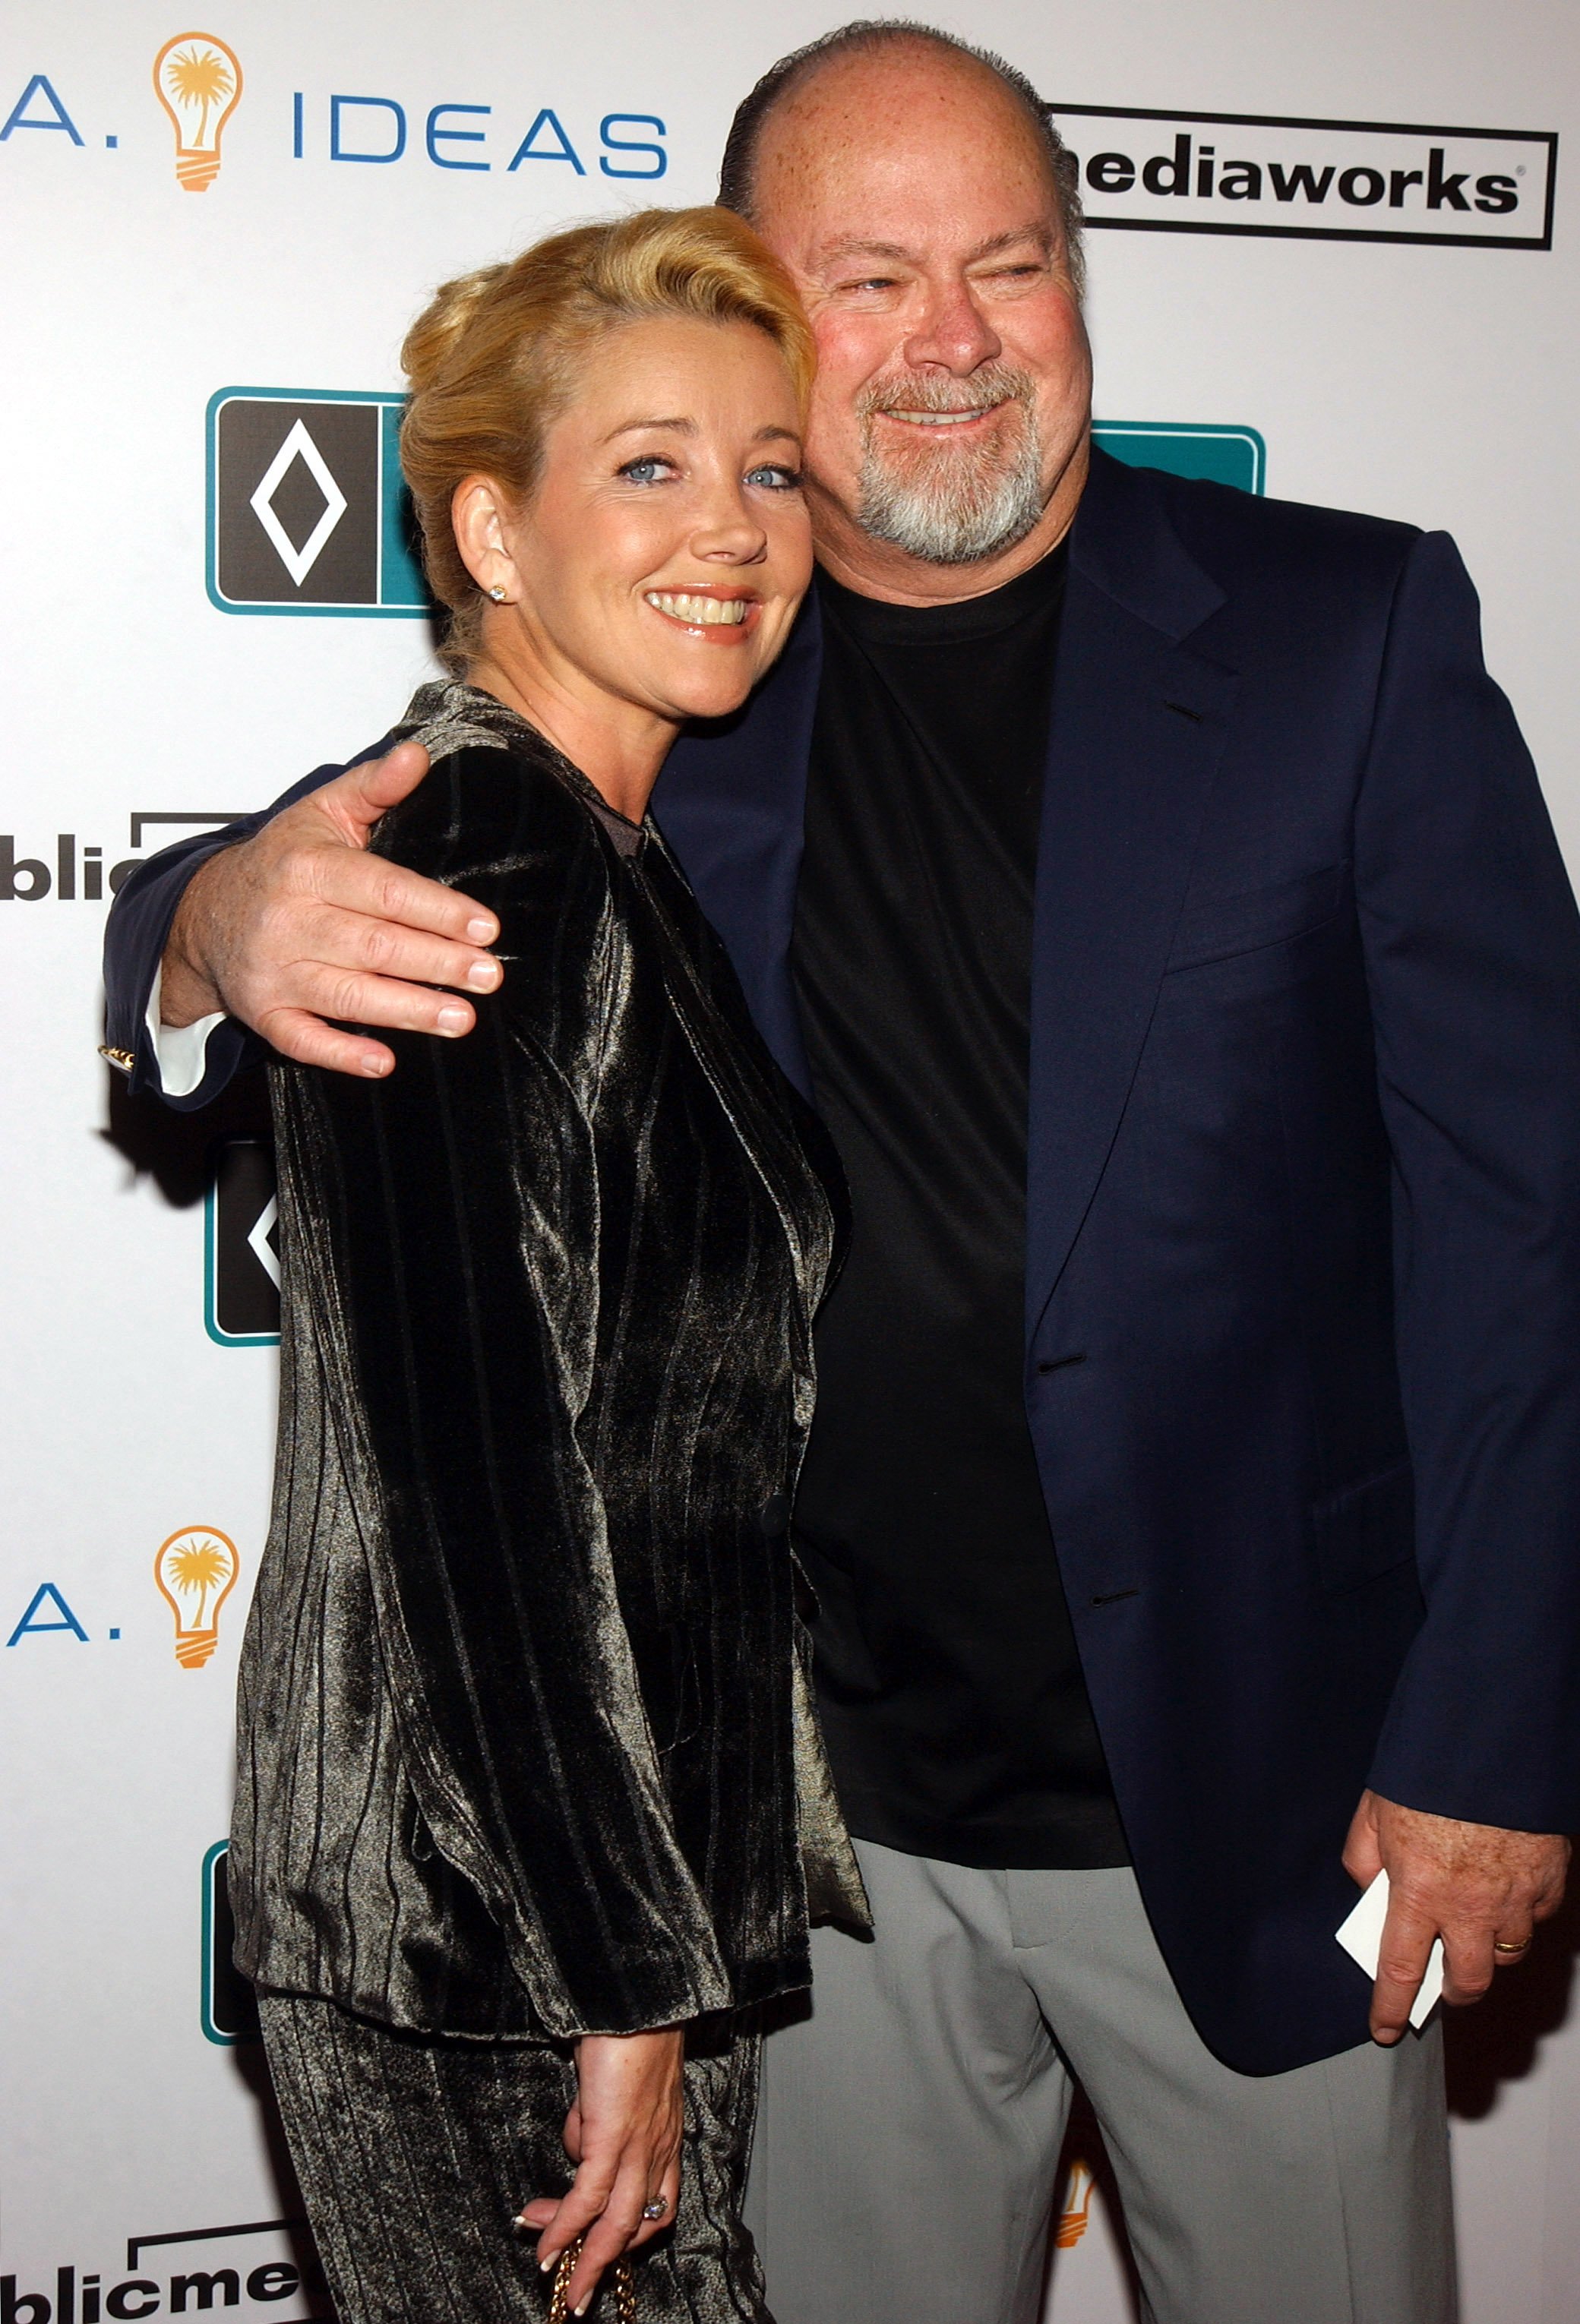 Melody Thomas Scott and husband Edward Scott during World Premiere of The Public Media Works Independent Feature Film "Carpool Guy" - Arrivals at The ArcLight in Hollywood, California, United States. | Source: Getty Images